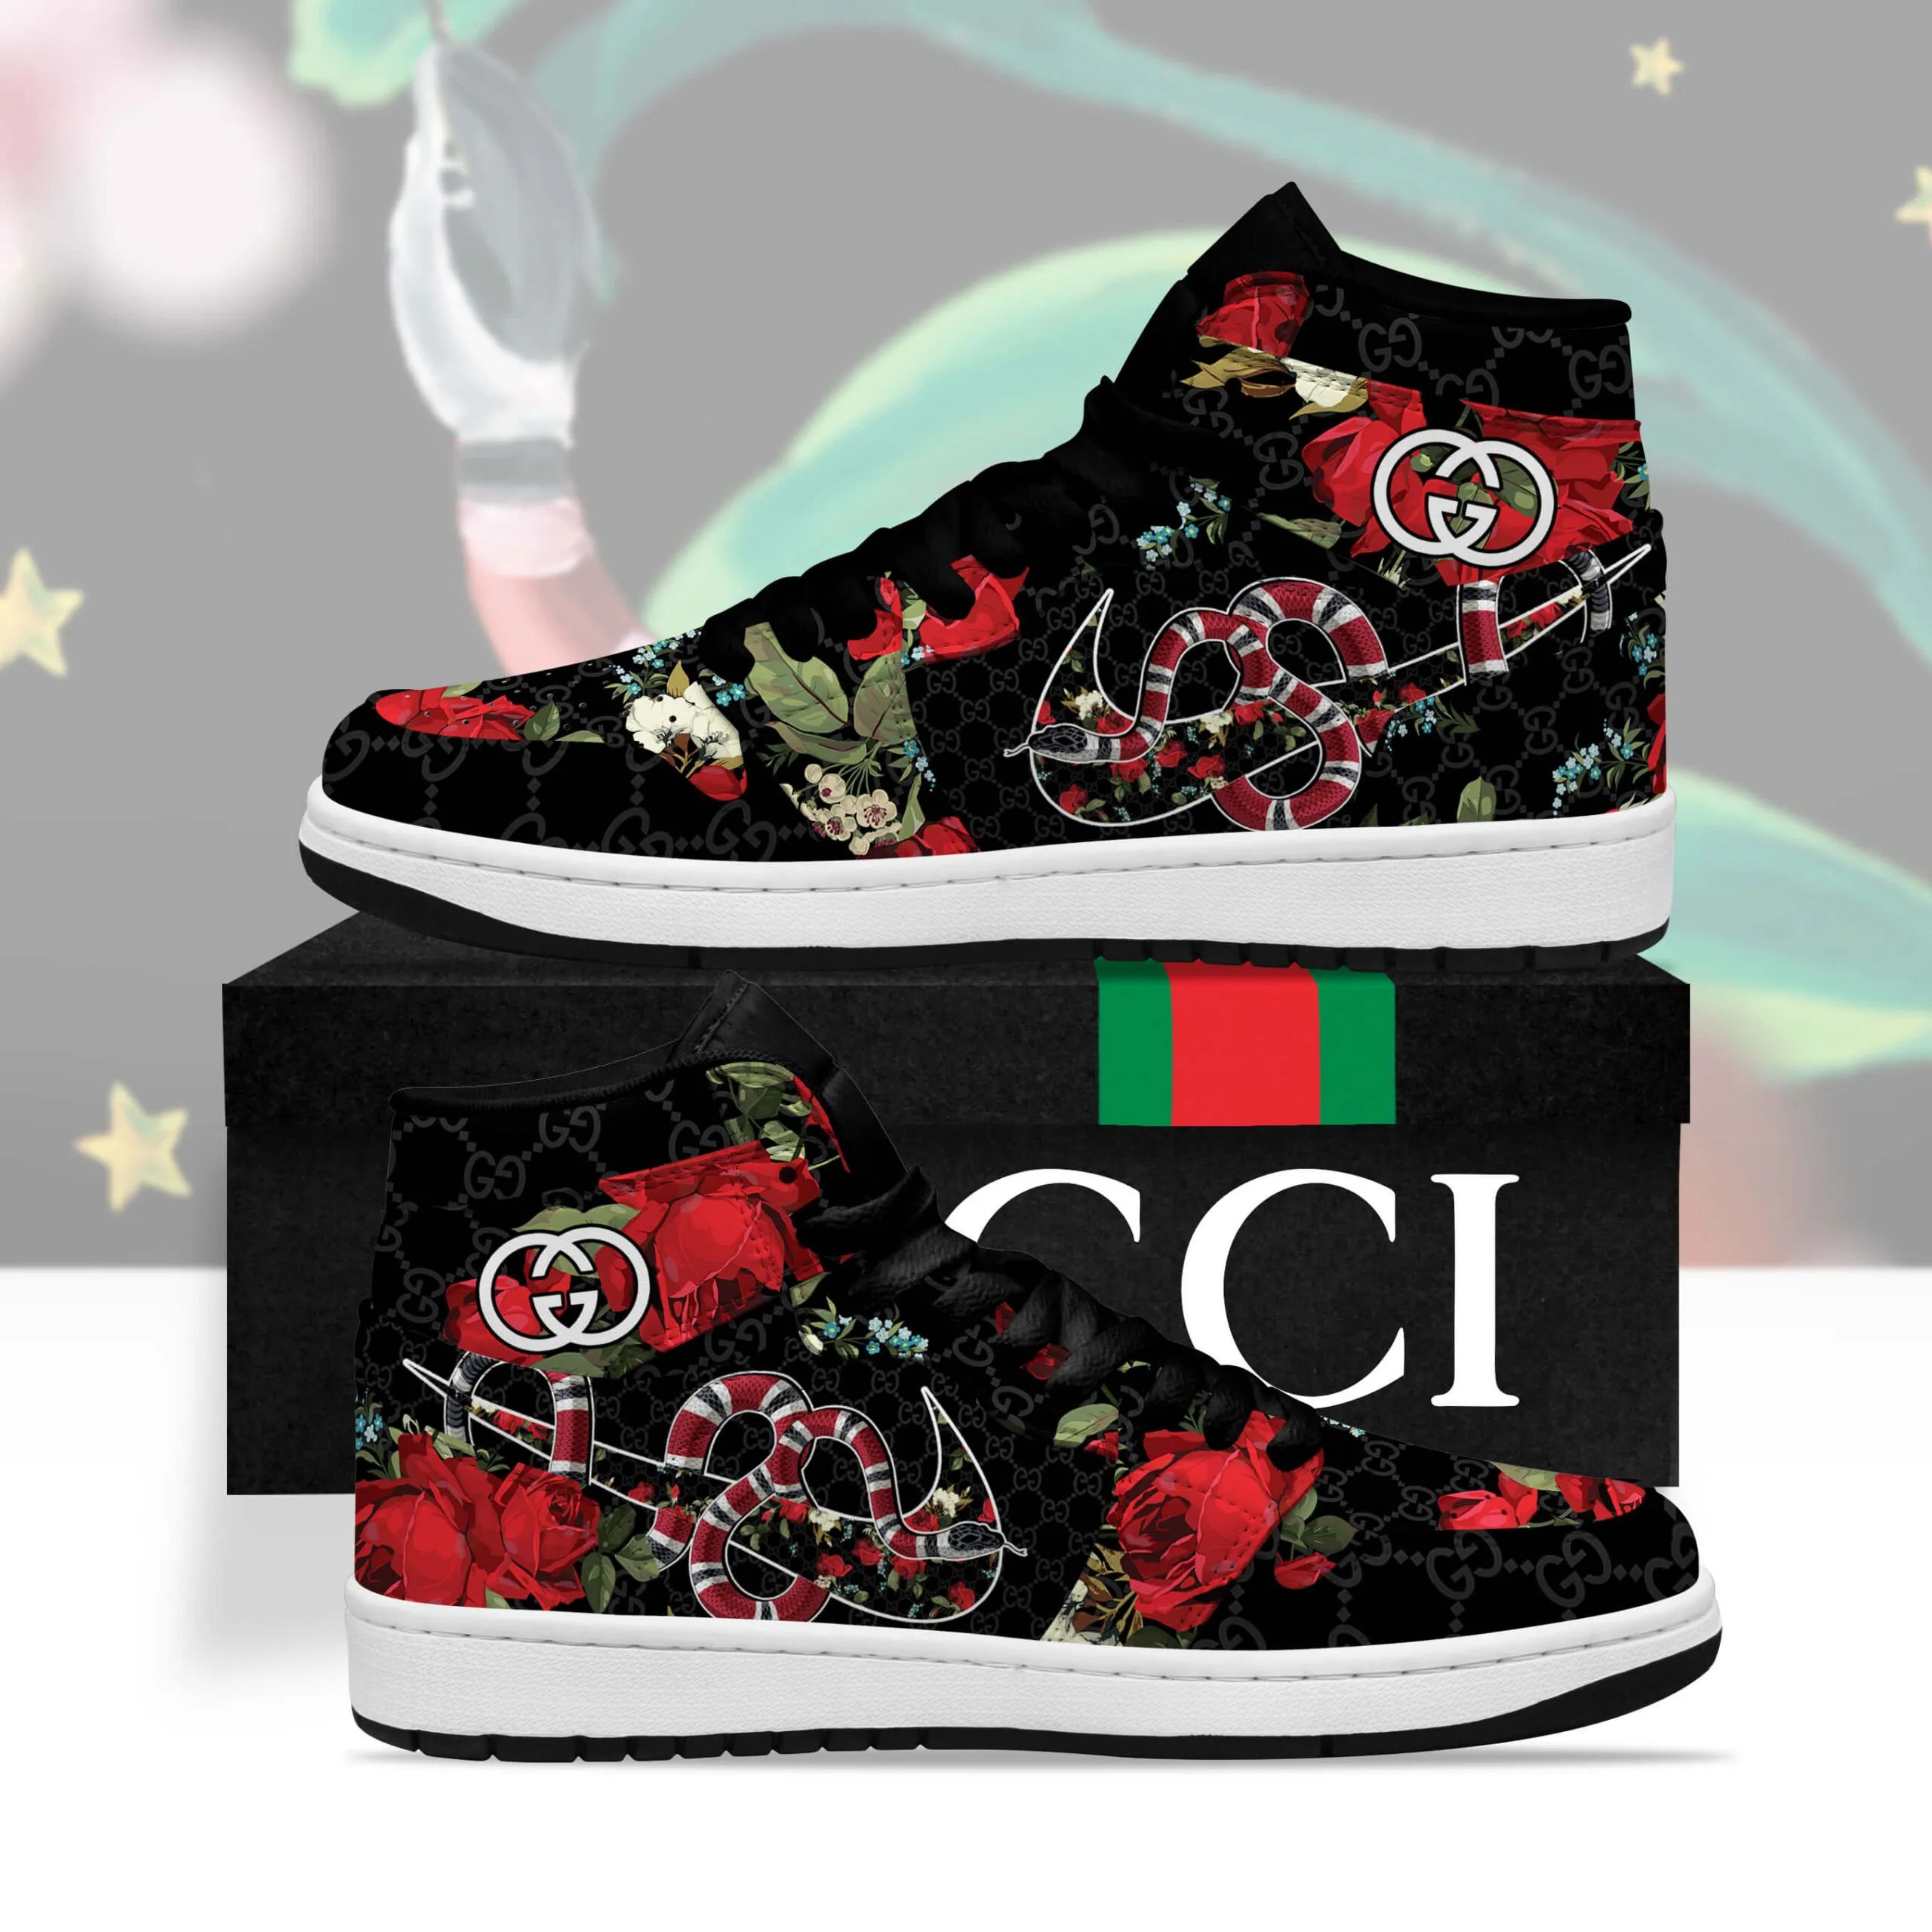 Gucci Snake Roses High Air Jordan Shoes Fashion Brand Luxury Sneakers